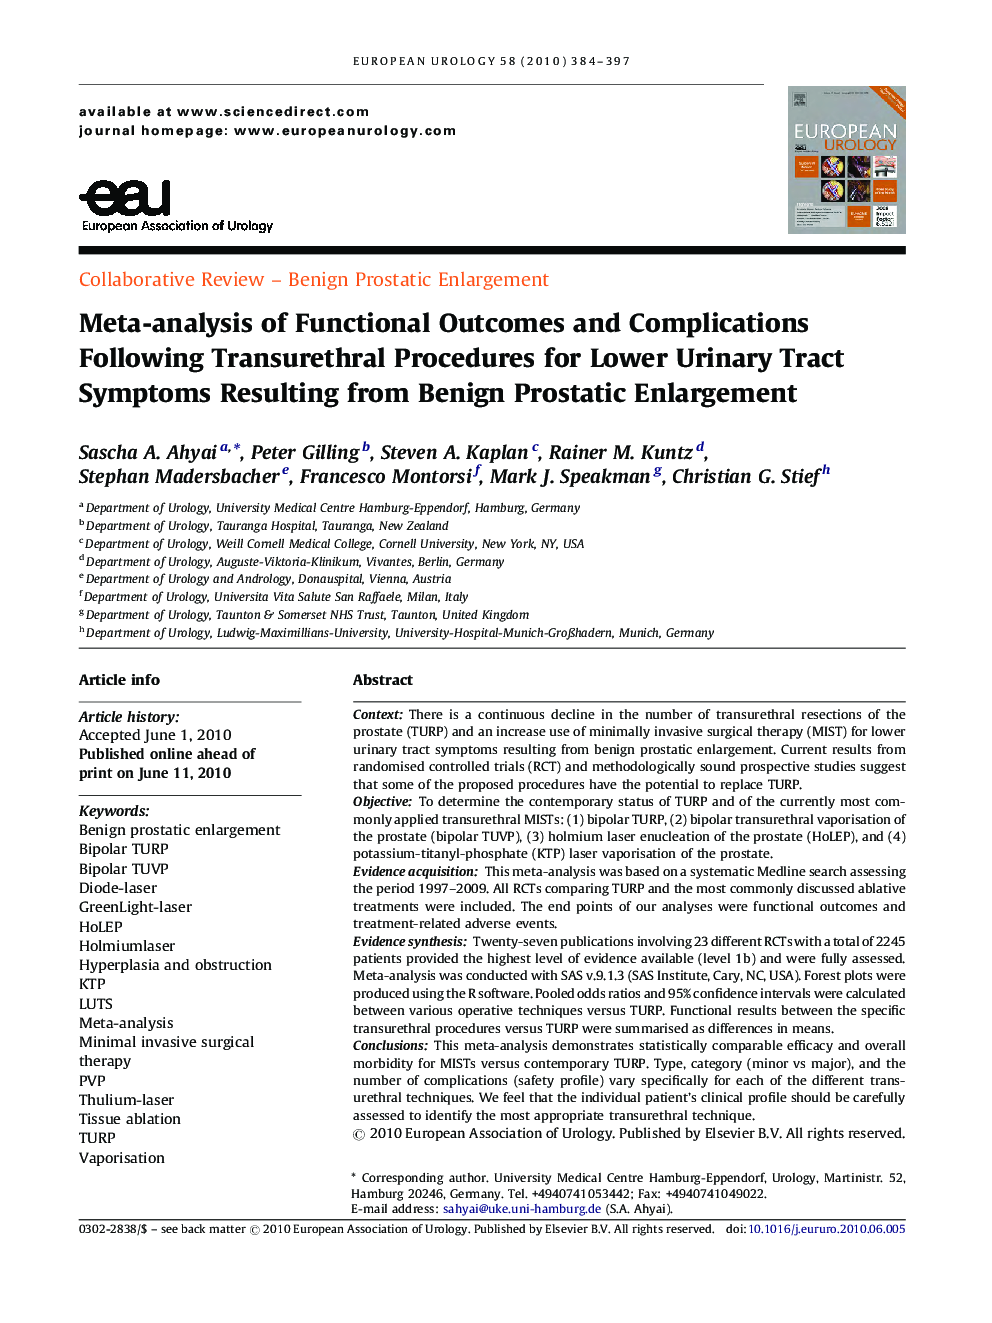 Meta-analysis of Functional Outcomes and Complications Following Transurethral Procedures for Lower Urinary Tract Symptoms Resulting from Benign Prostatic Enlargement